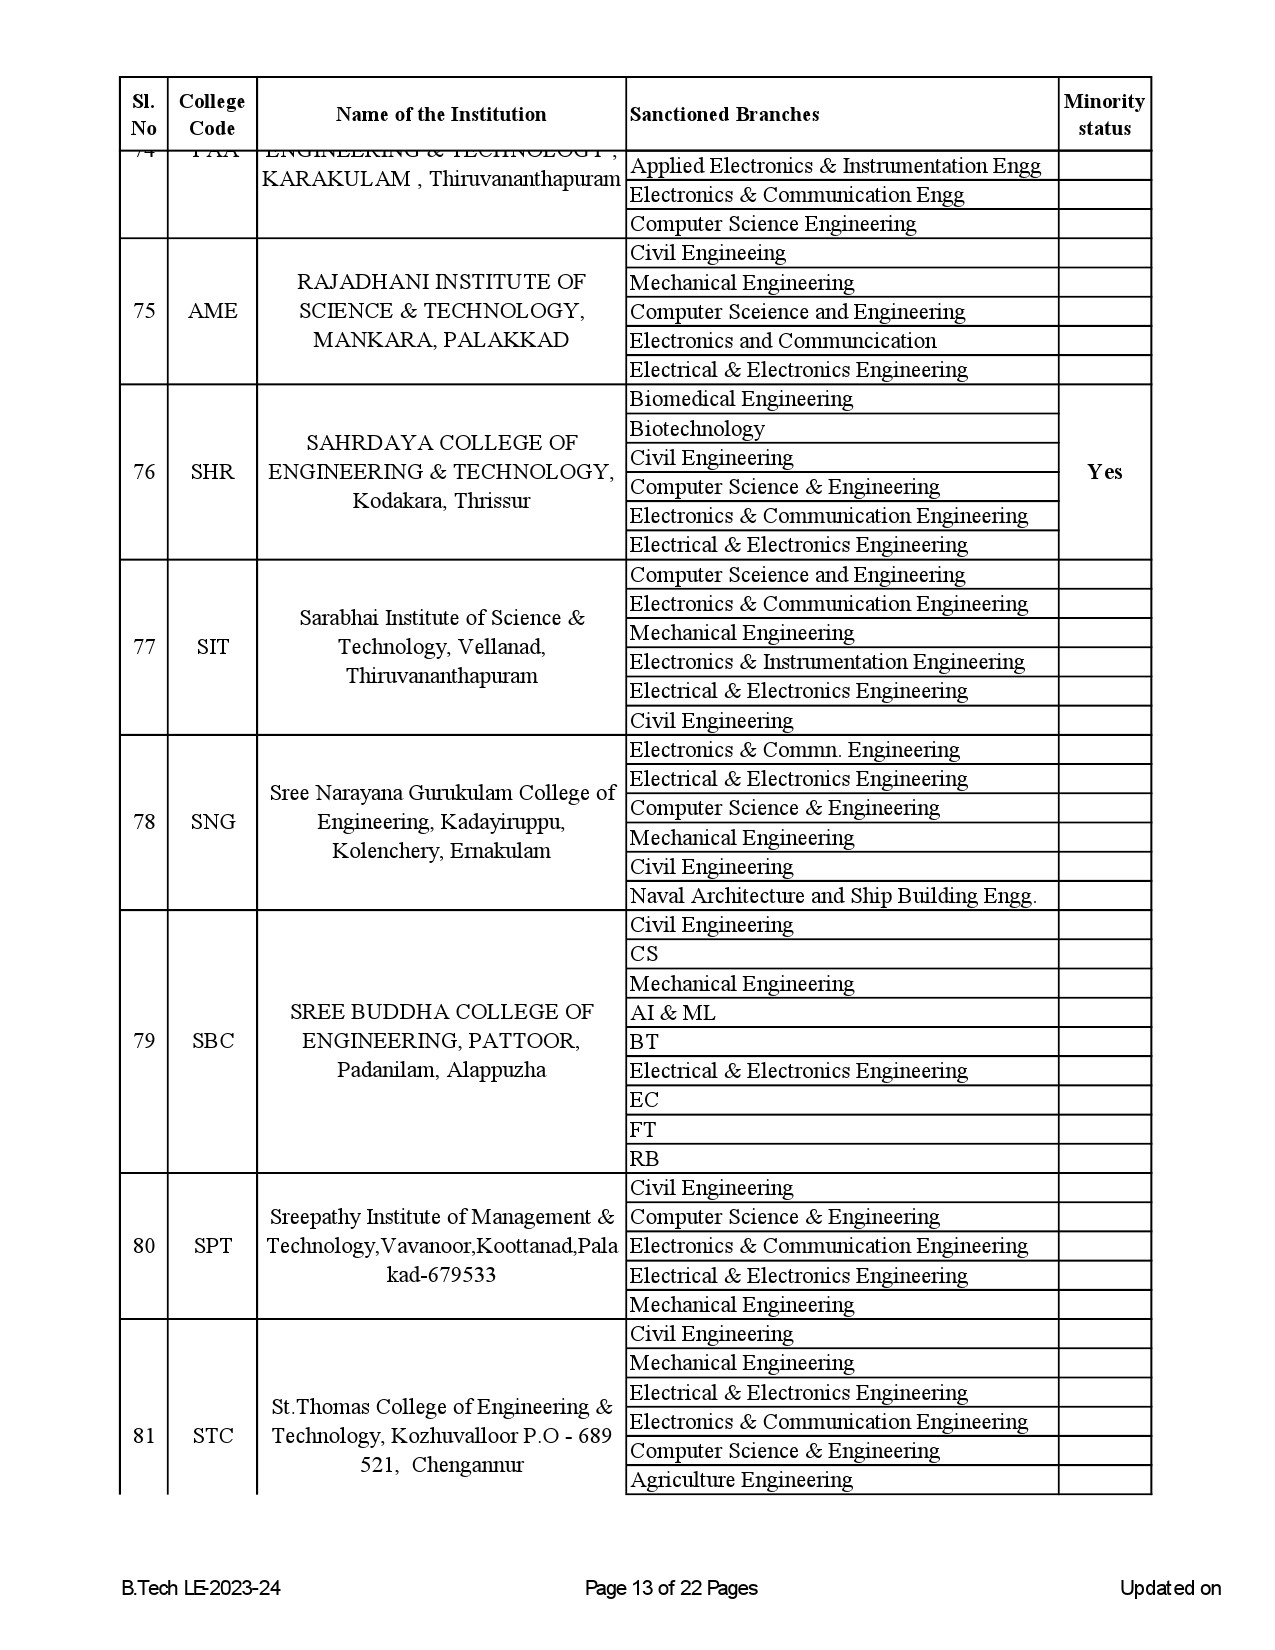 List of Institutions for B Tech Lateral Entry Admission 2023 24 - Notification Image 13